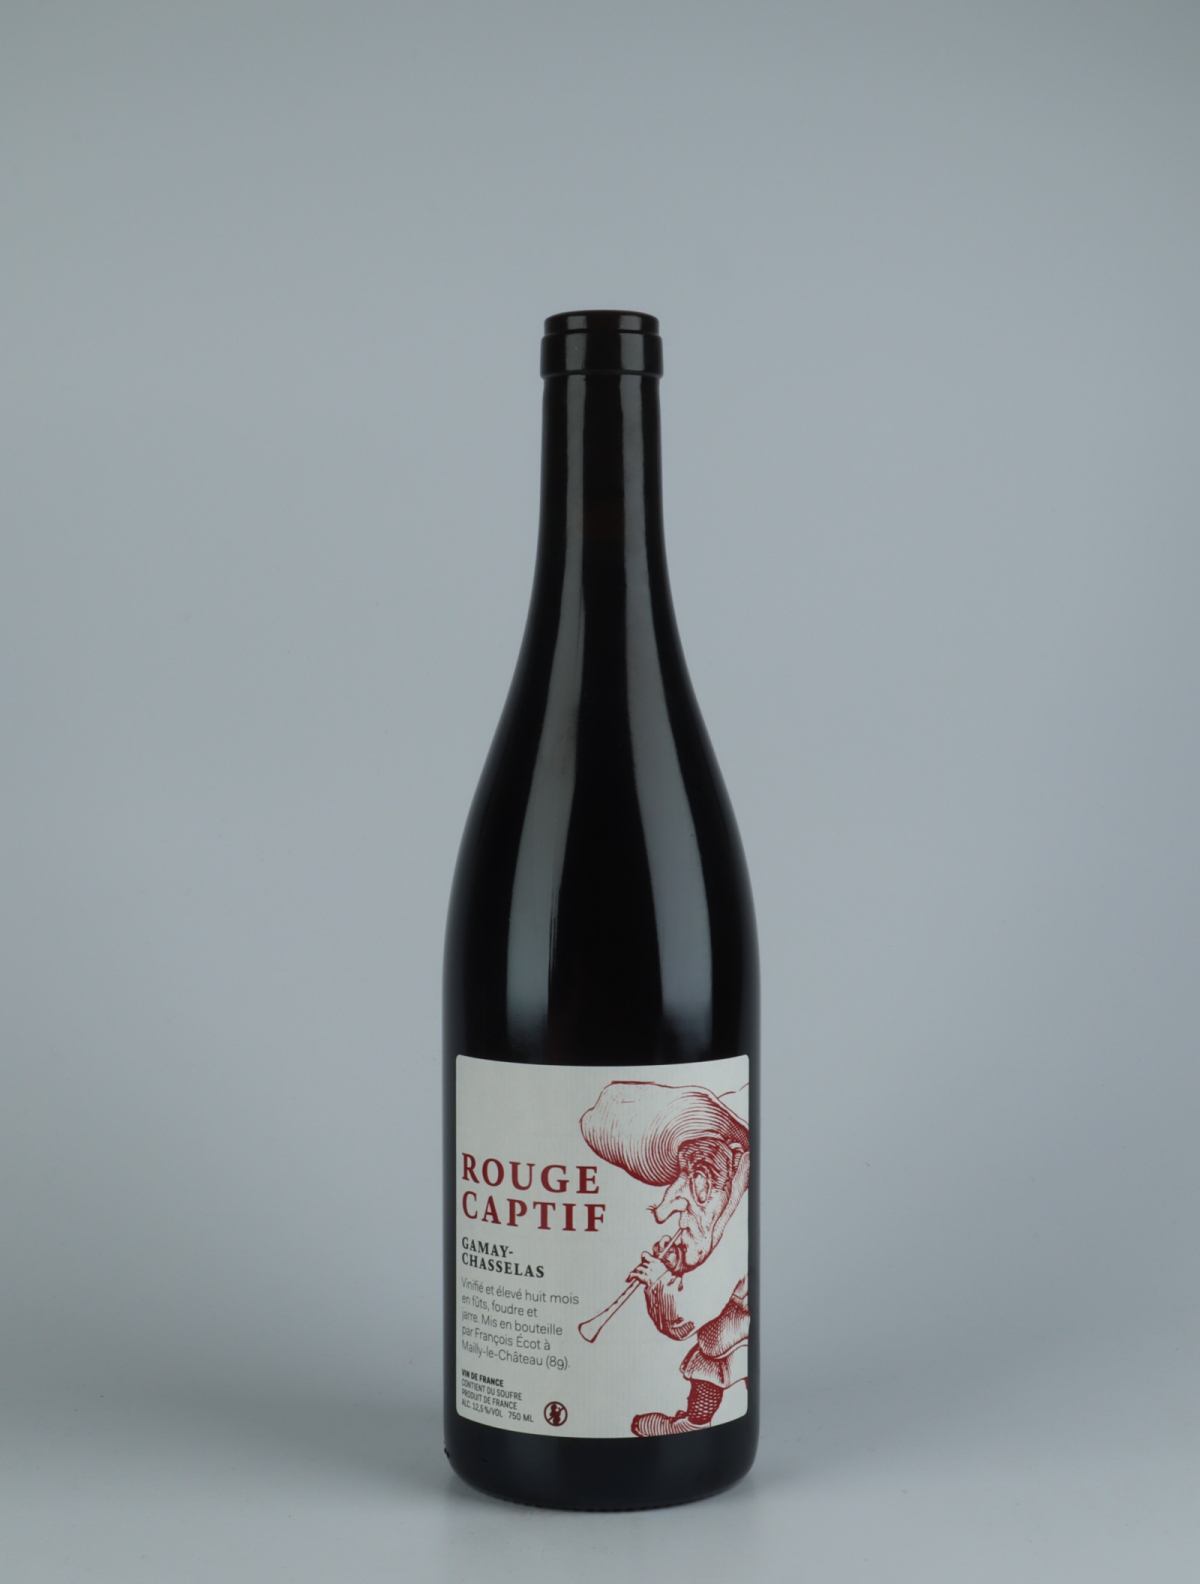 A bottle 2020 Rouge Captif Red wine from François Ecot, Burgundy in France